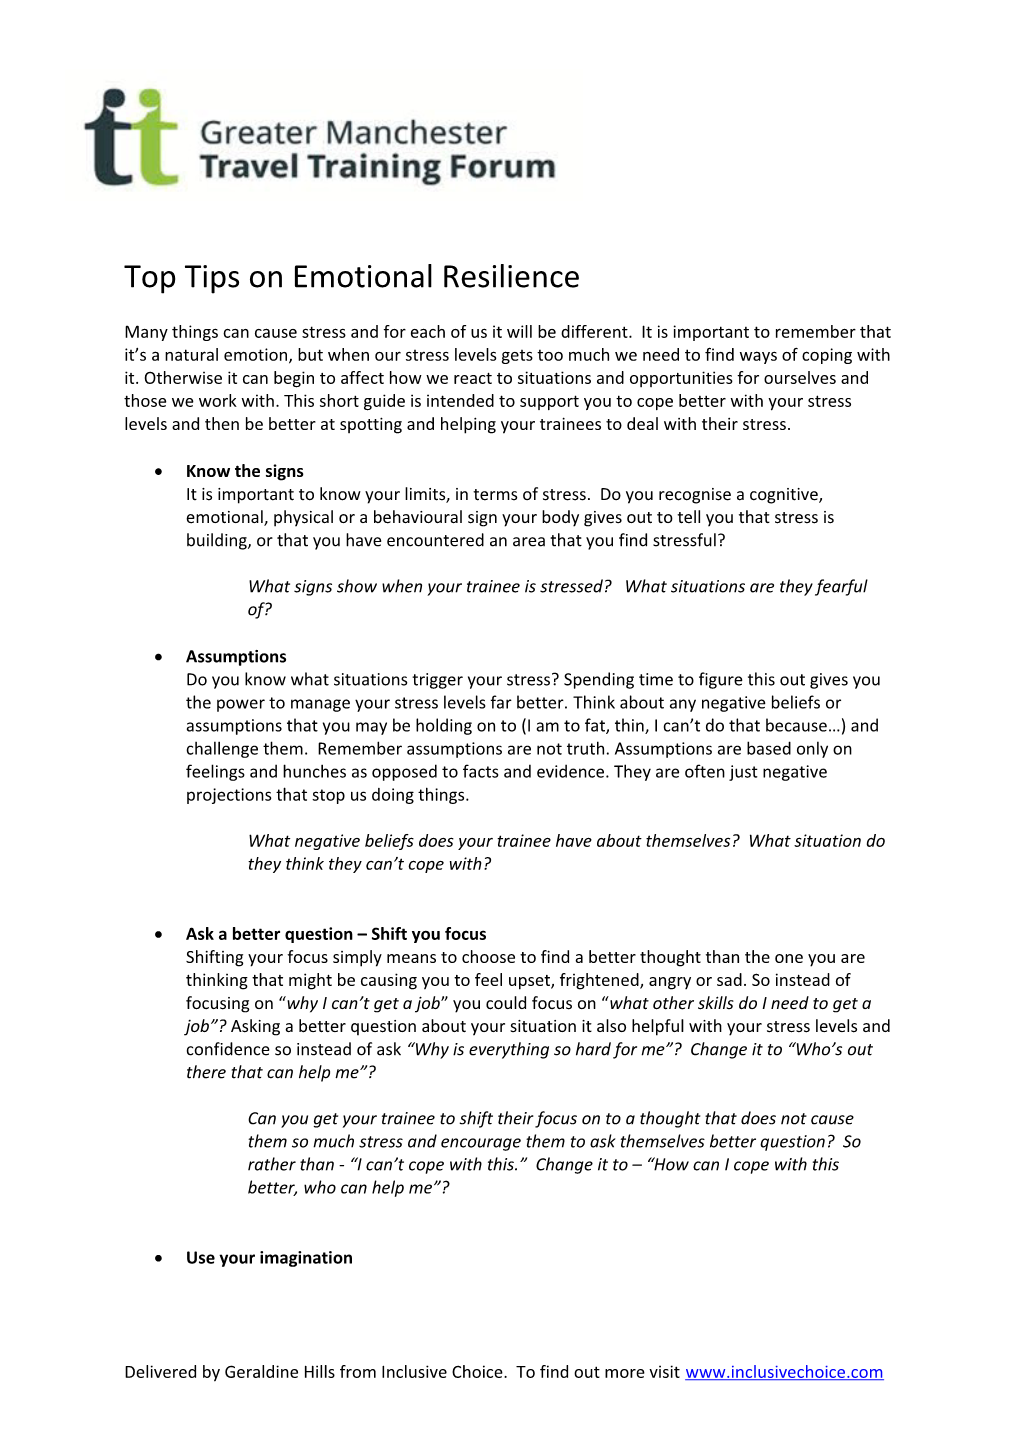 Top Tips on Emotional Resilience